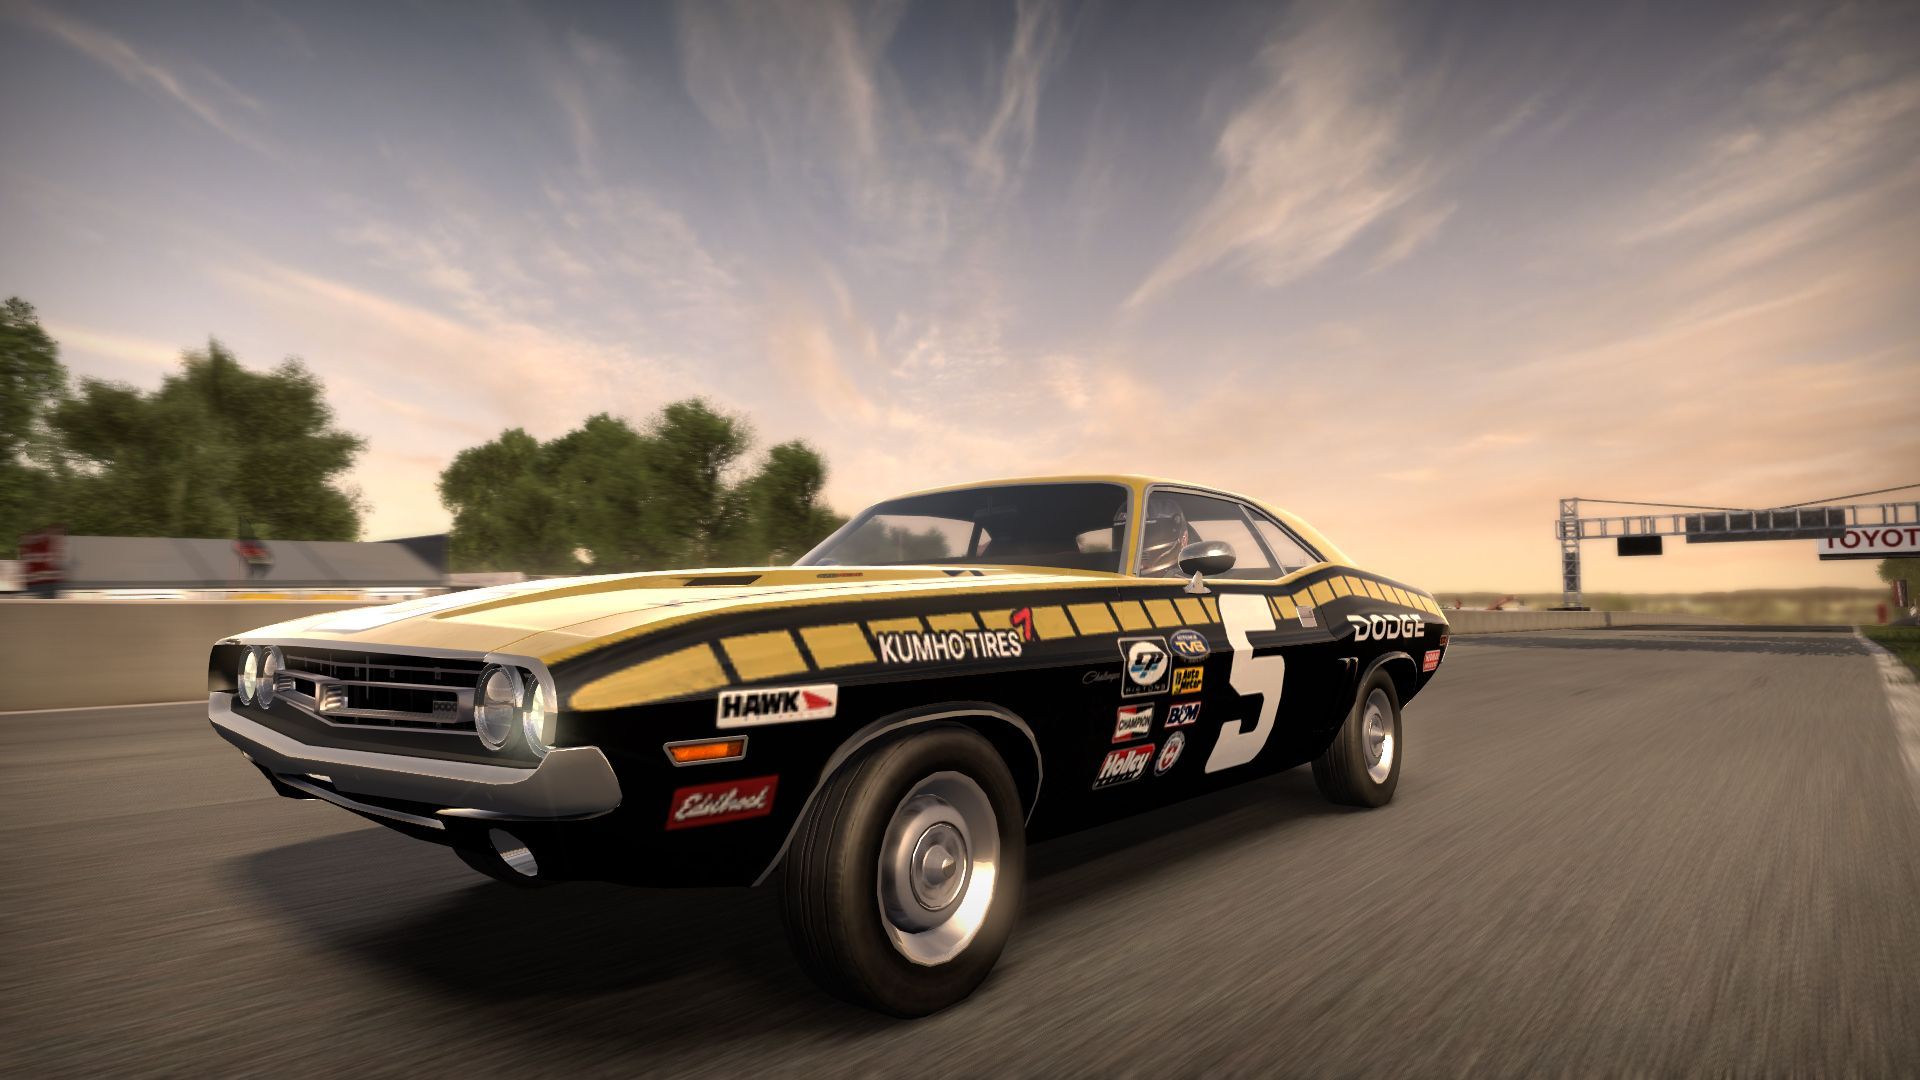 Challenger Need For Speed Wallpaper - 14393